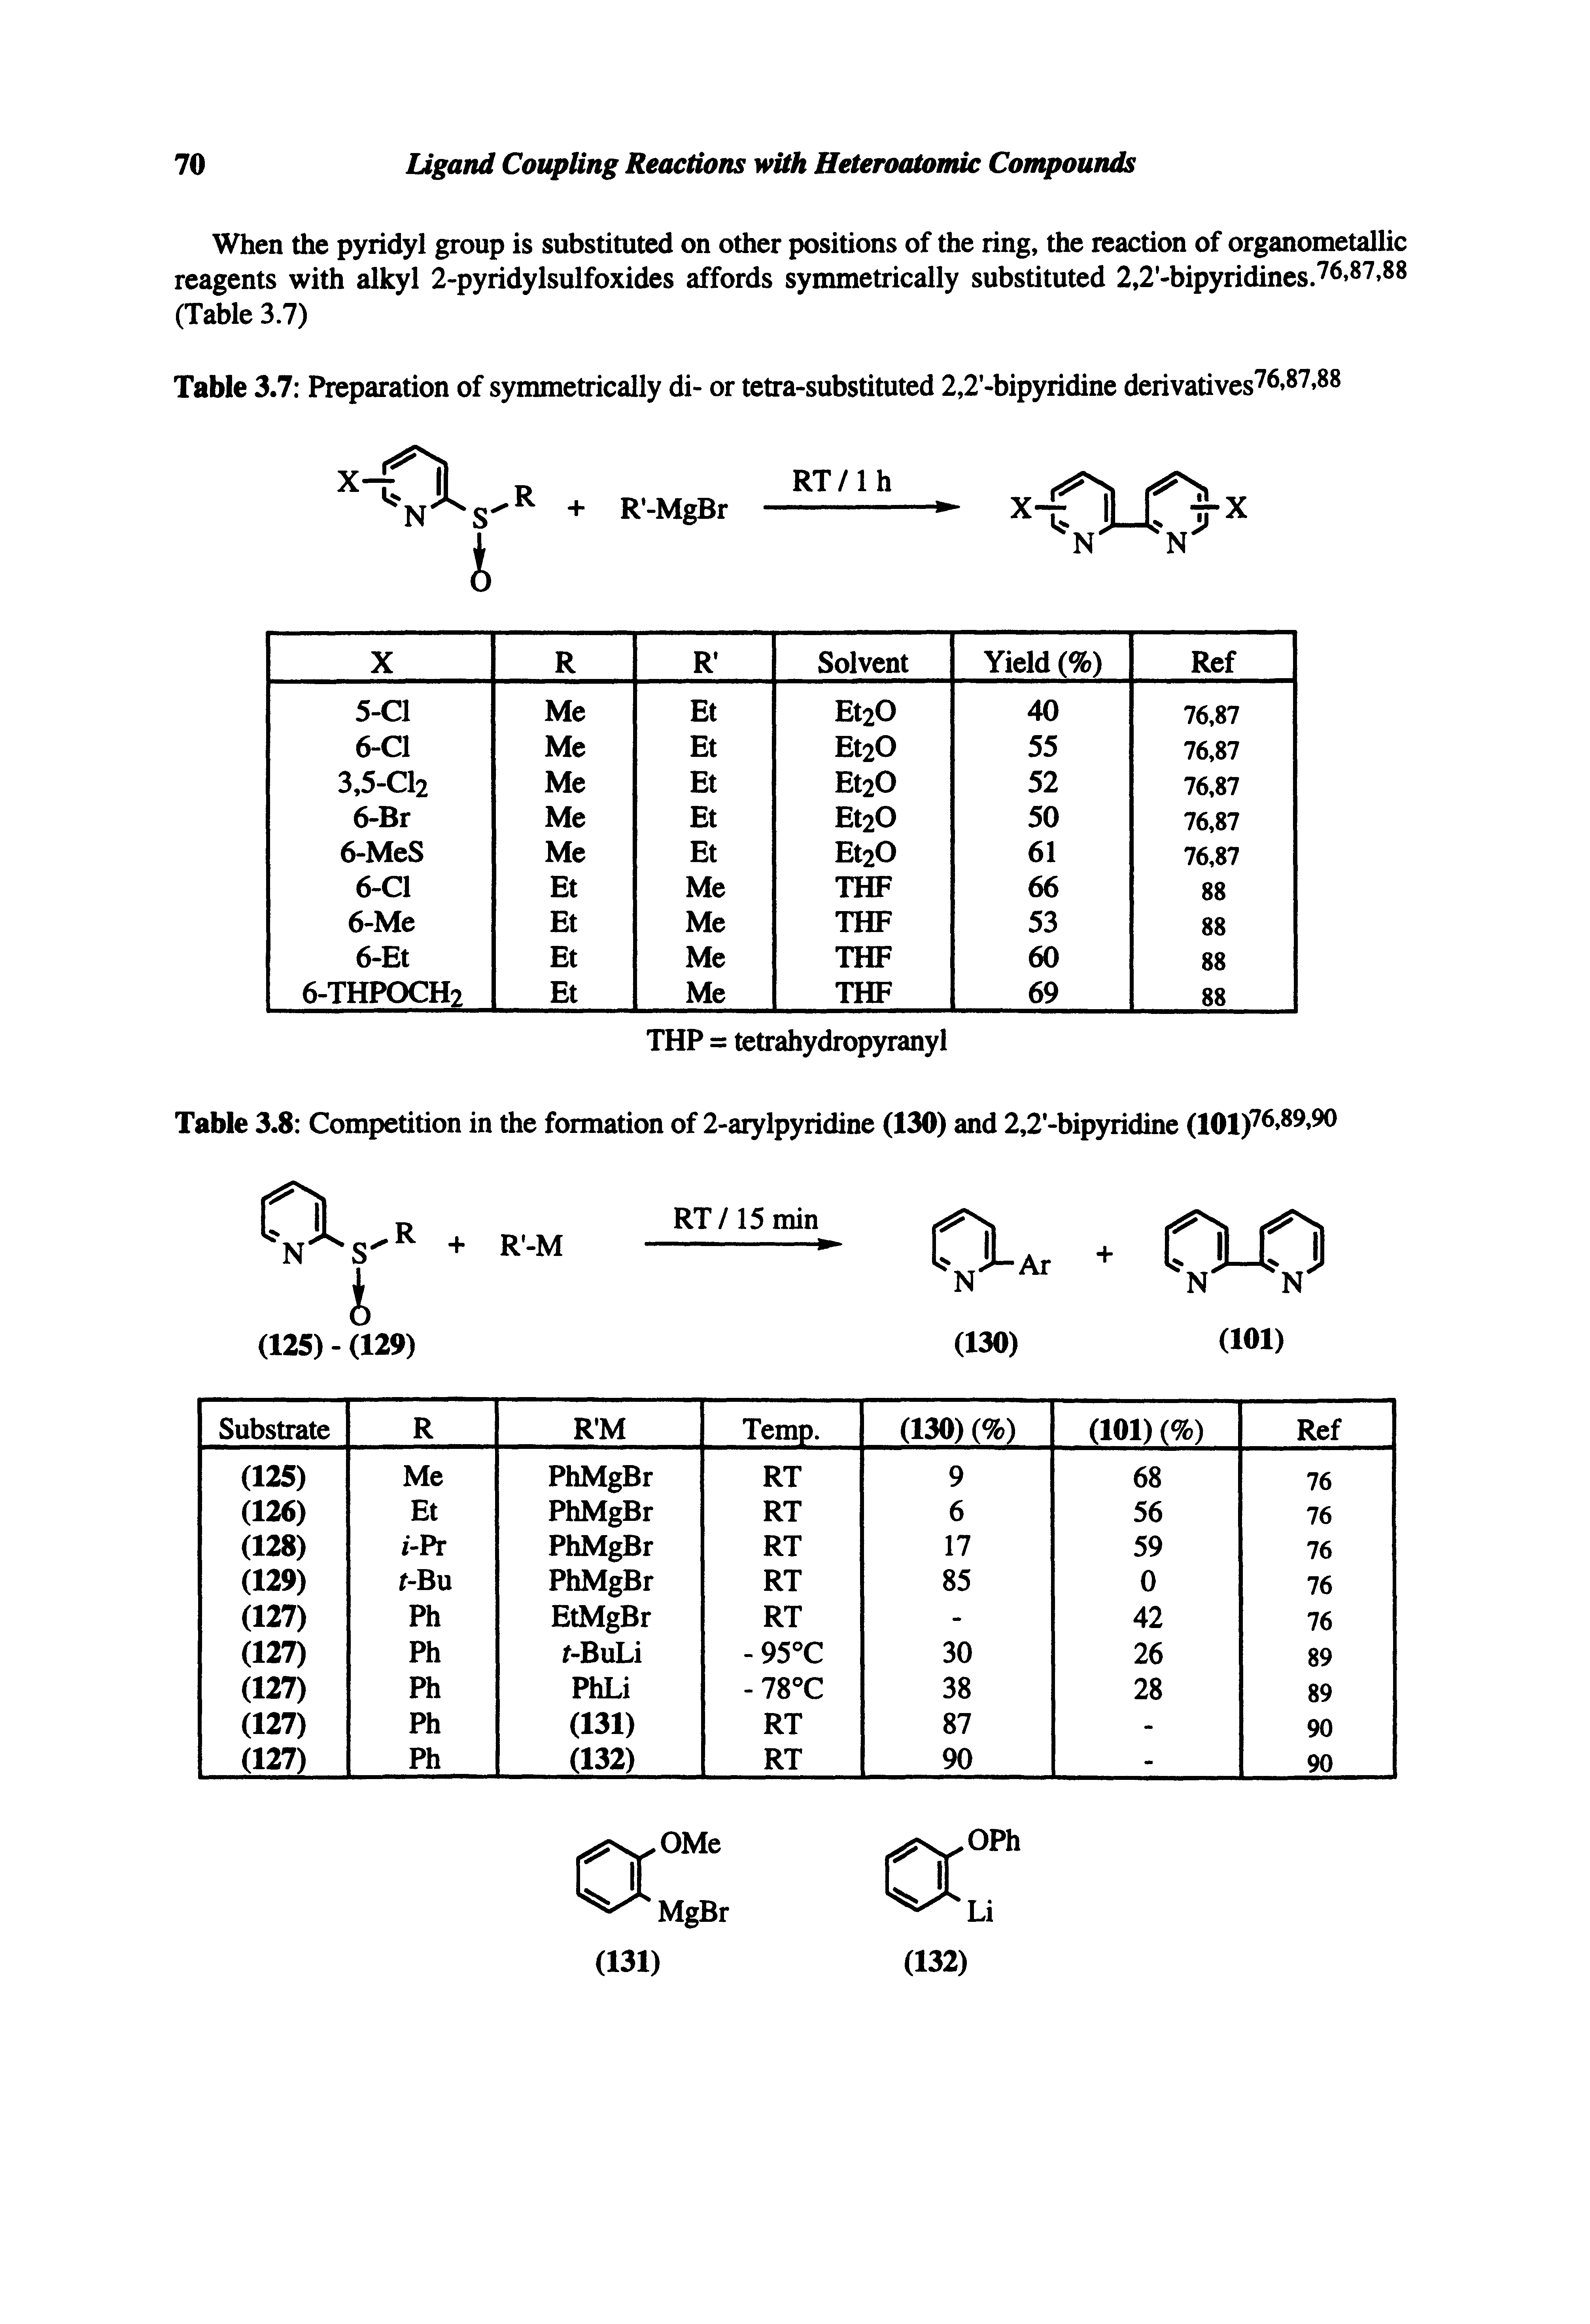 Table 3.7 Preparation of symmetrically di- or tetra-substituted 2,2 -bipyridine derivatives 76.87,88...